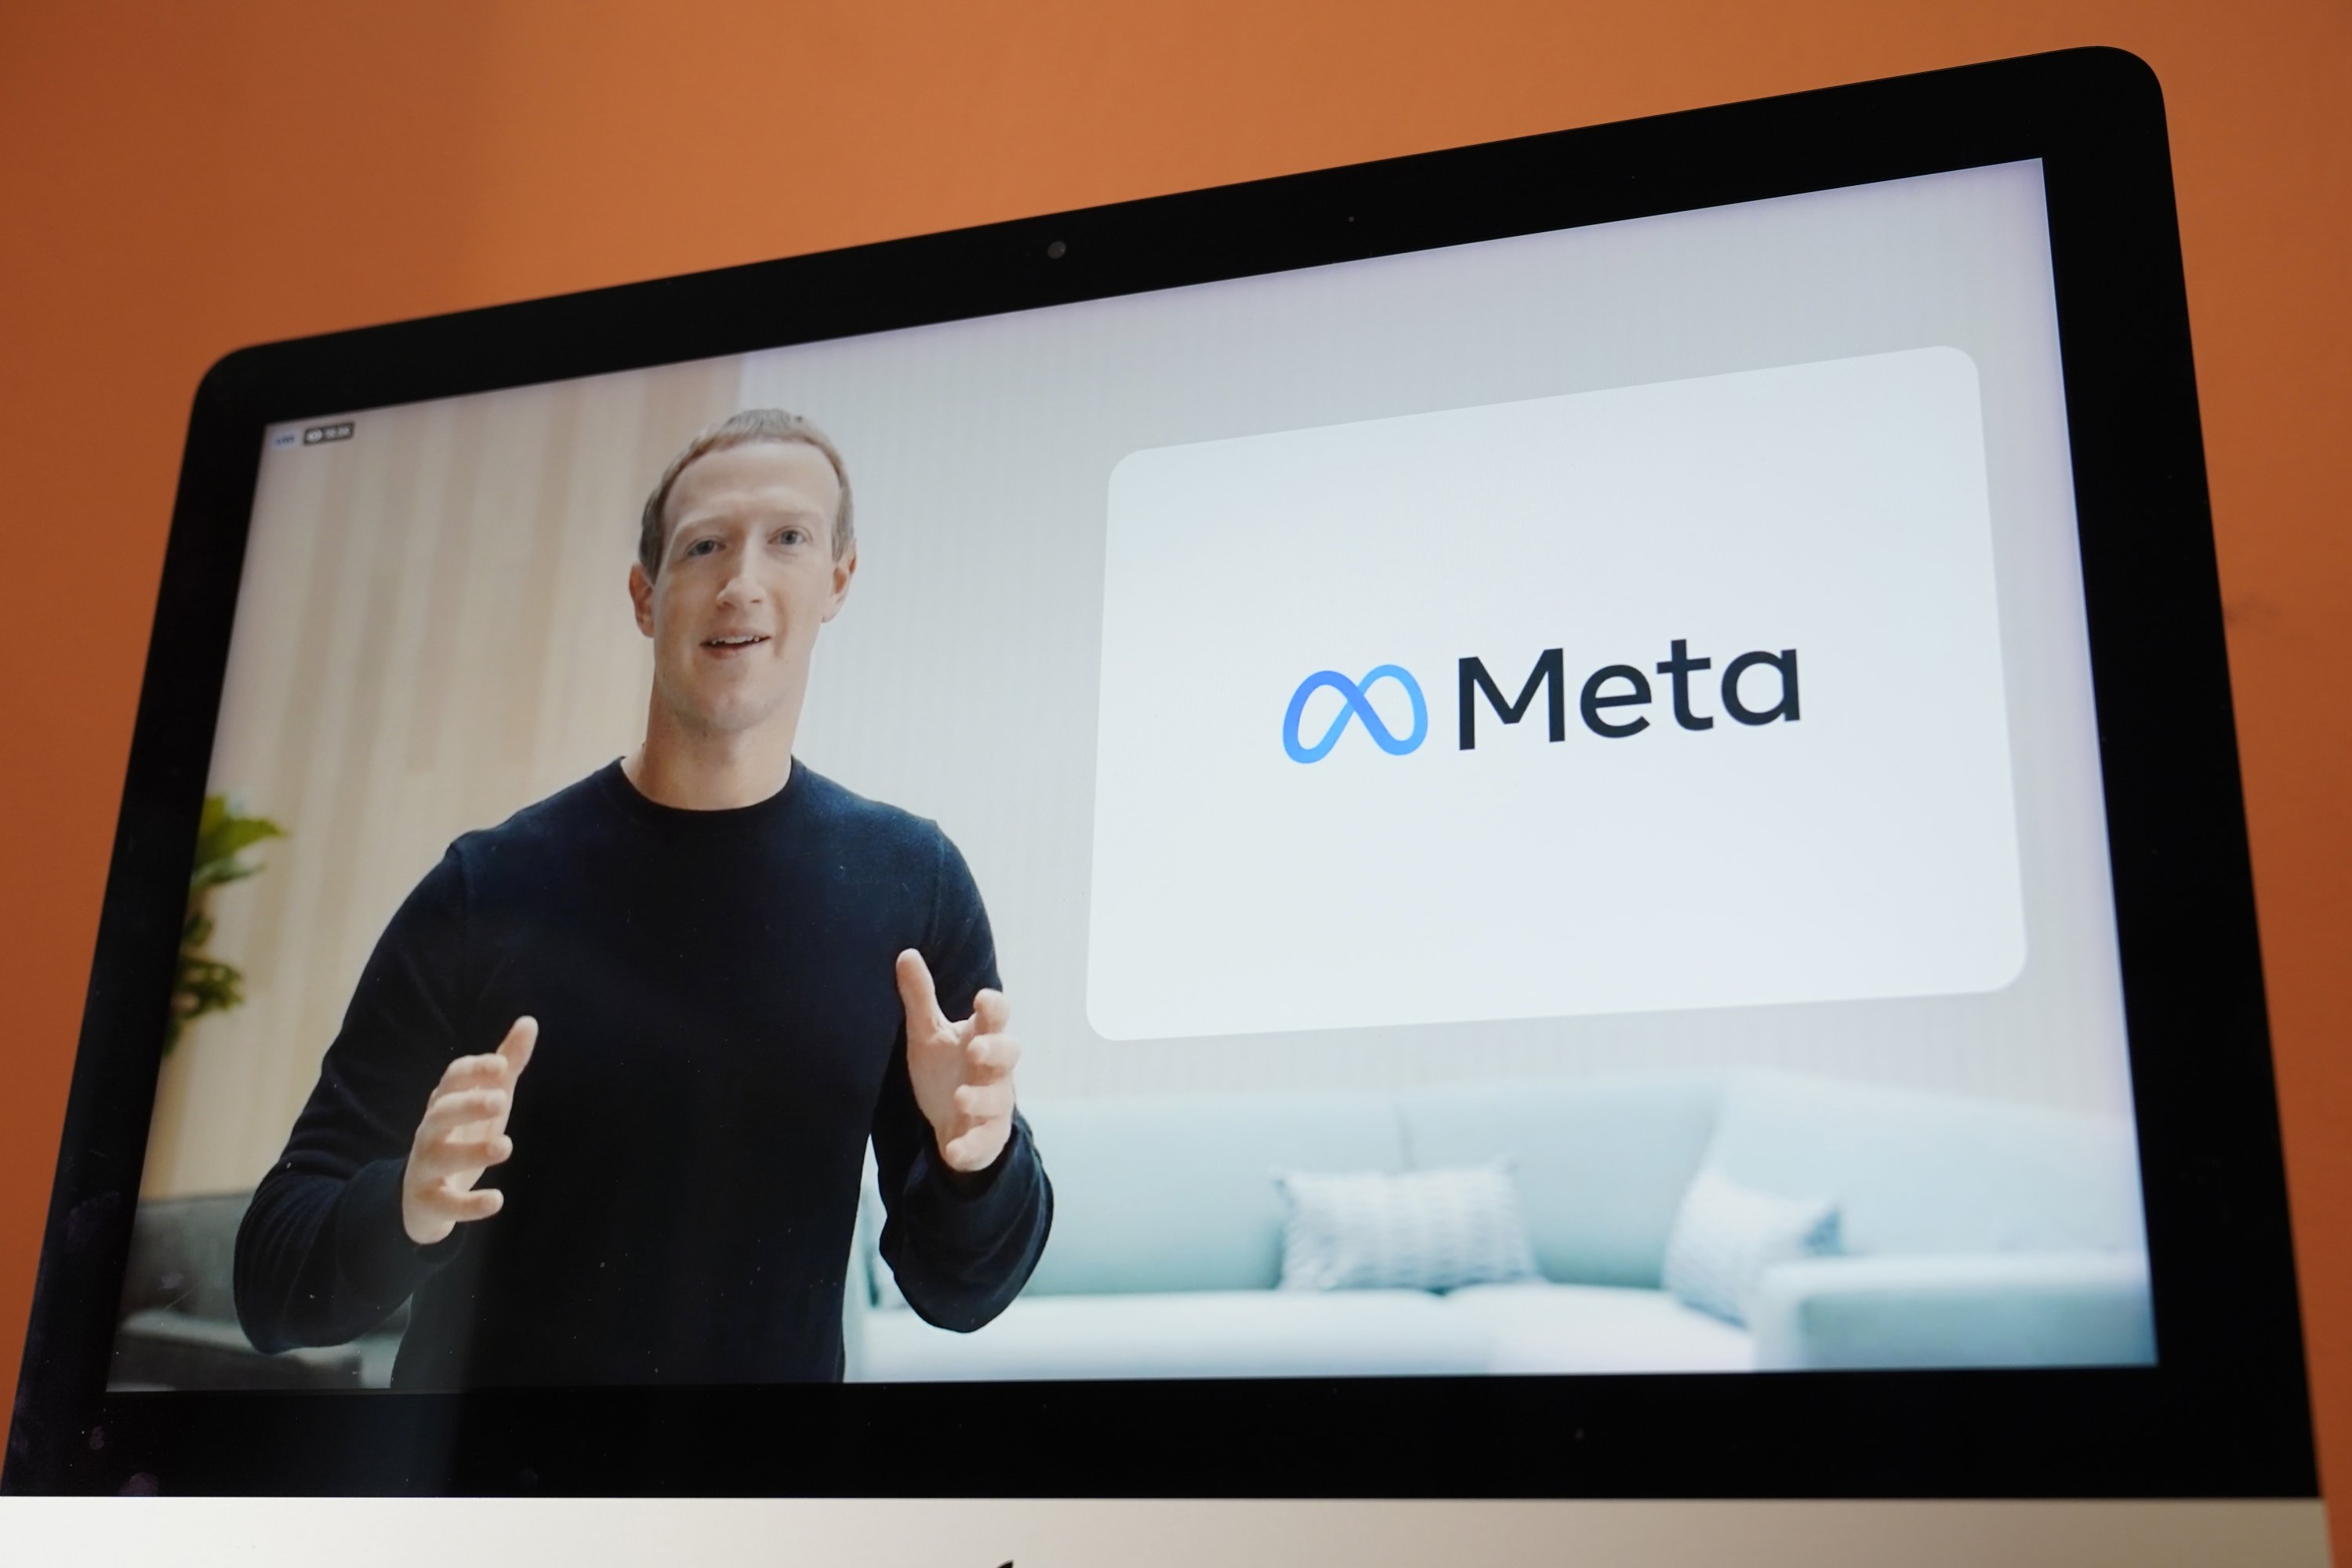 Facebook CEO Mark Zuckerberg is seen on the screen of a device in Sausalito, California, during a virtual event to announce the rebrand of Facebook as Meta, Oct. 28, 2021. (AP Photo)